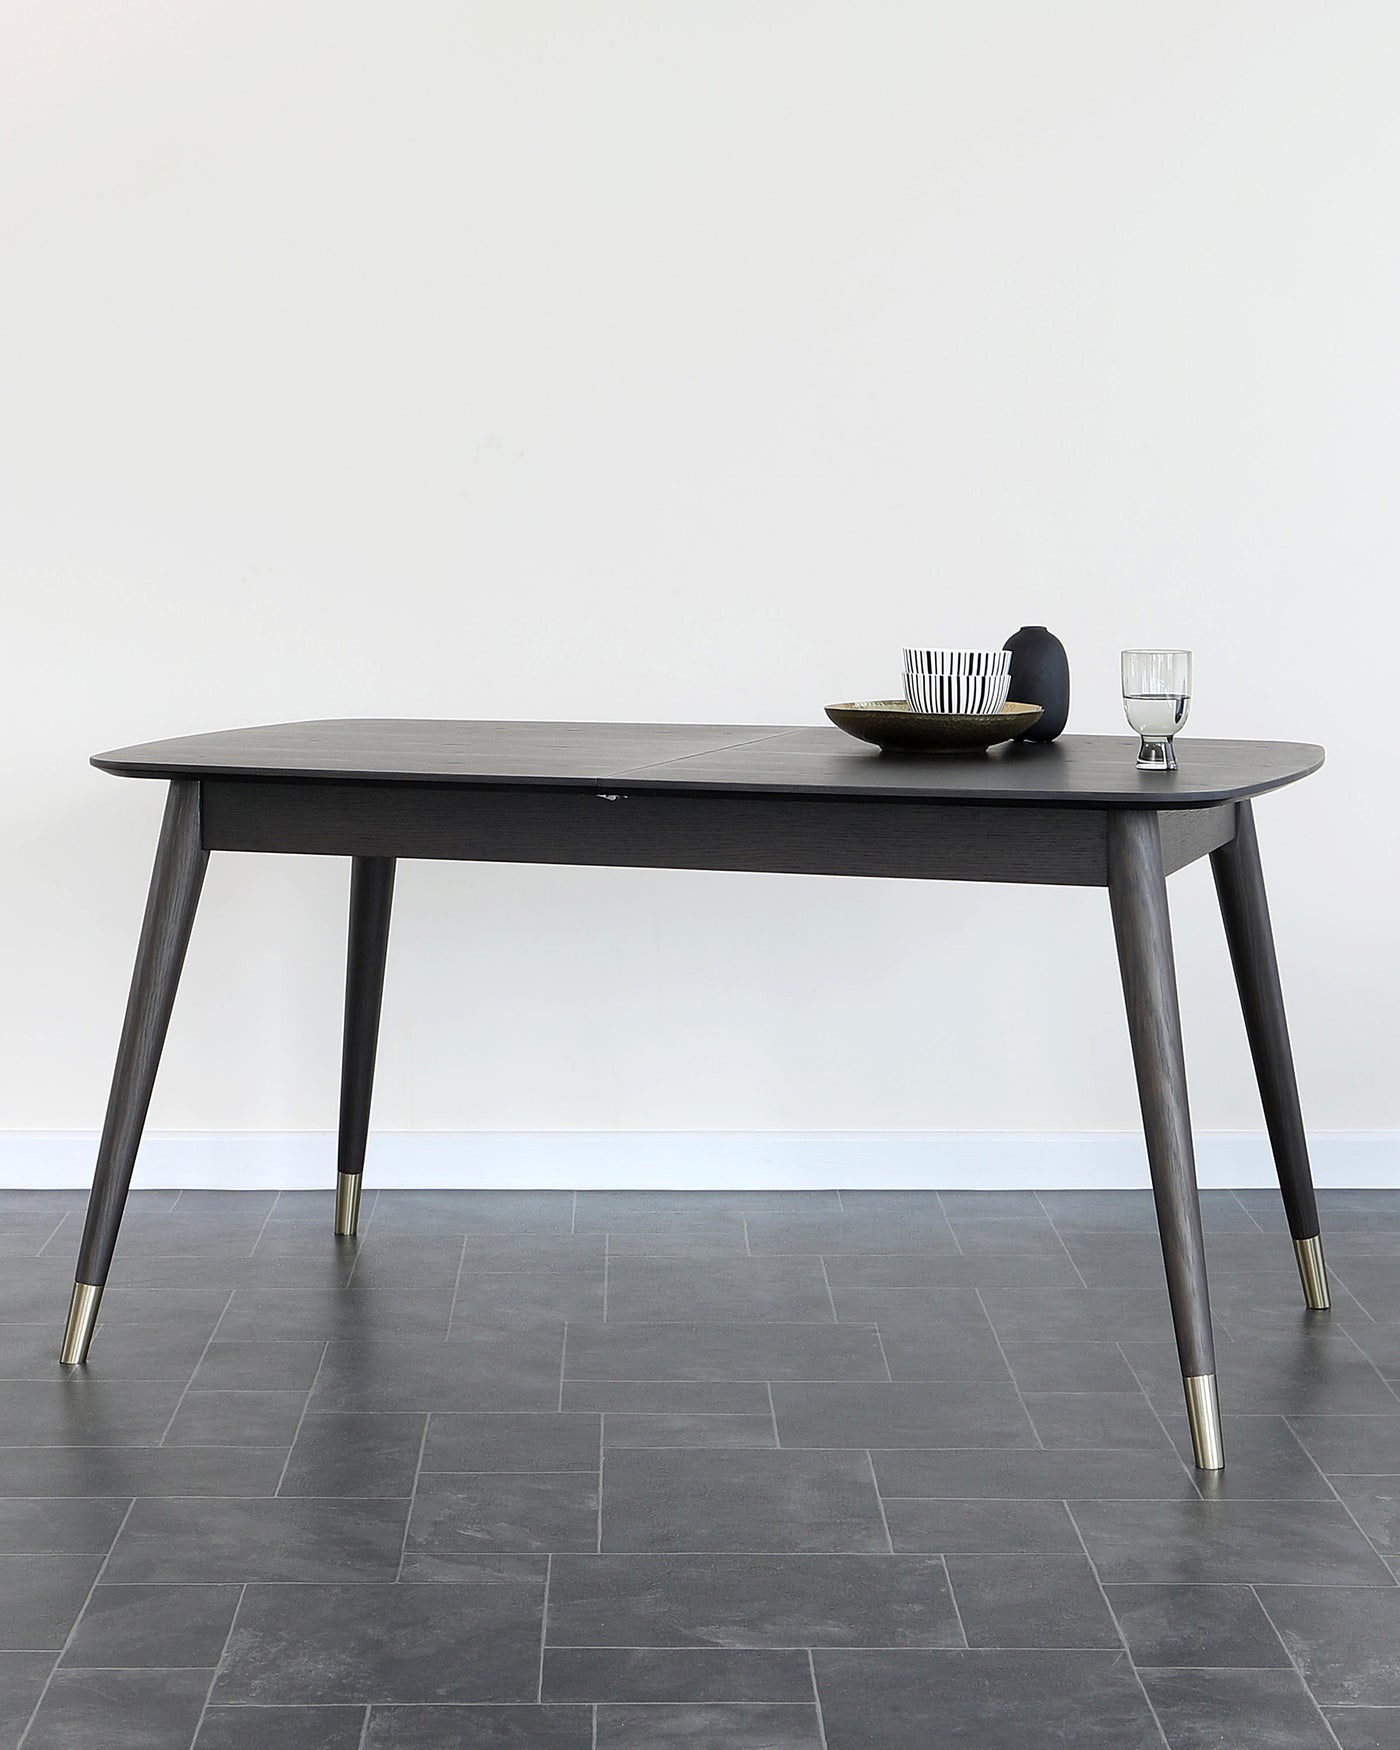 An elegant, mid-century modern style dining table with a dark wood finish and tapered legs, complemented by brass-capped feet. The table, set against a wall with a light grey floor, is adorned with a minimalist centrepiece and a clear glass.